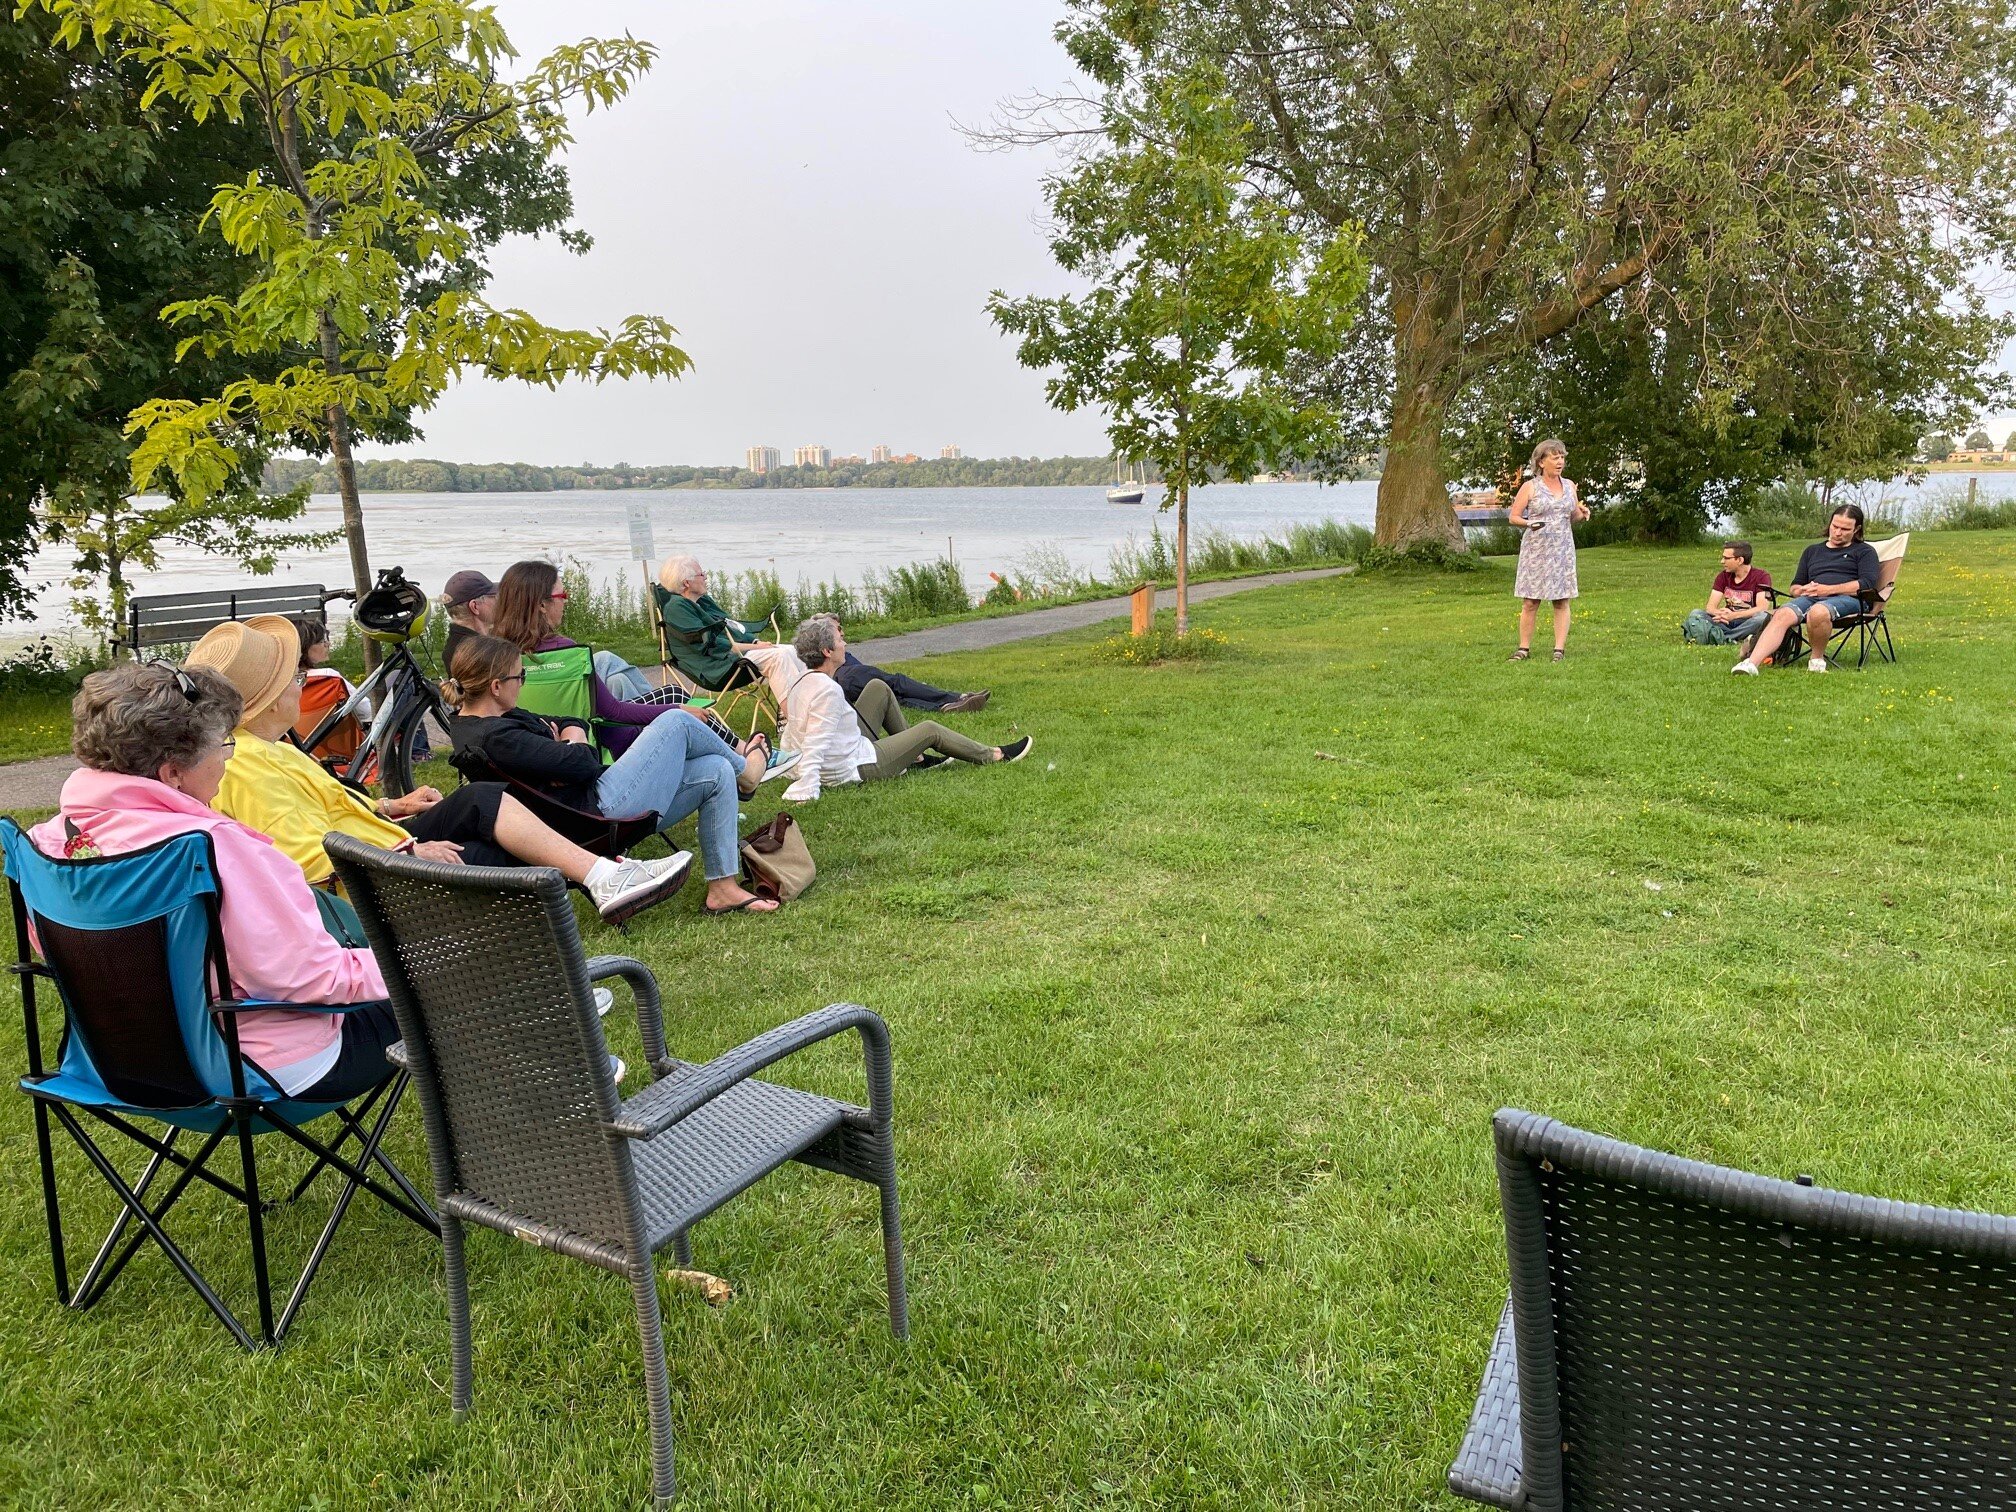 Community members gather in chairs and on the grass for an informal chat about the future of the Cataraqui River.